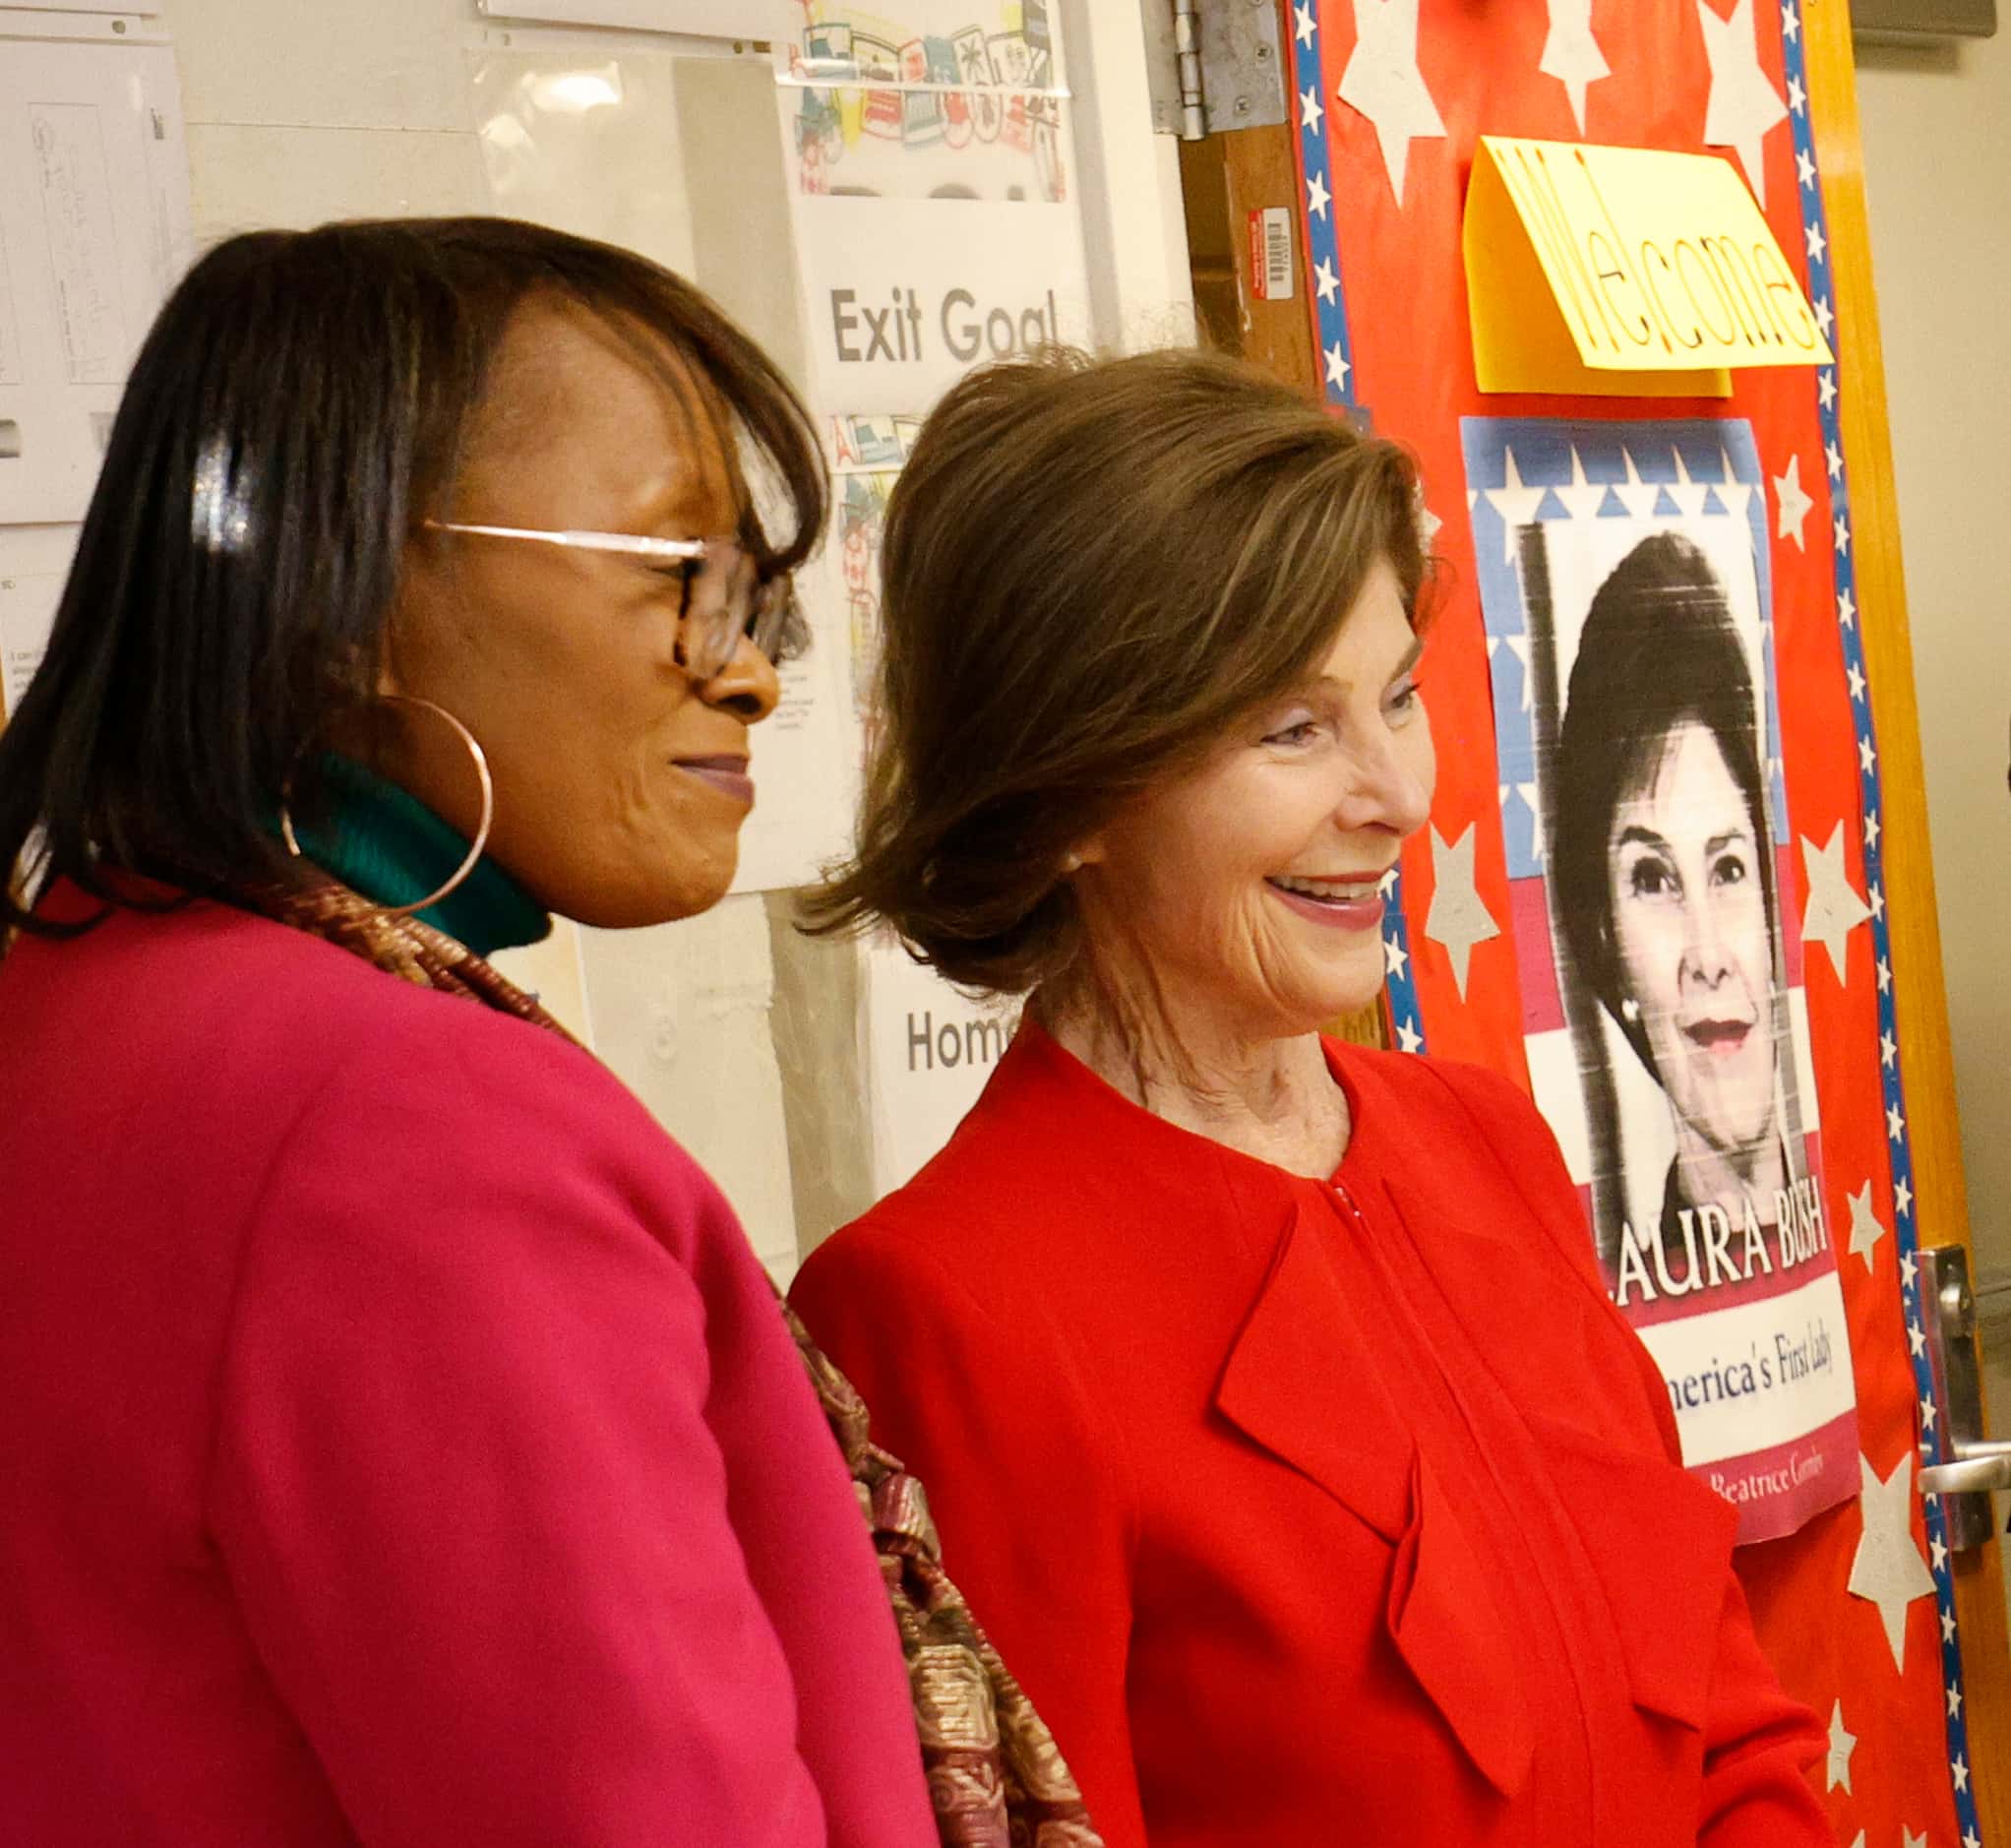 Jacqueline Wallace, a first grade teacher, left, greets former first lady Laura Bush, when...